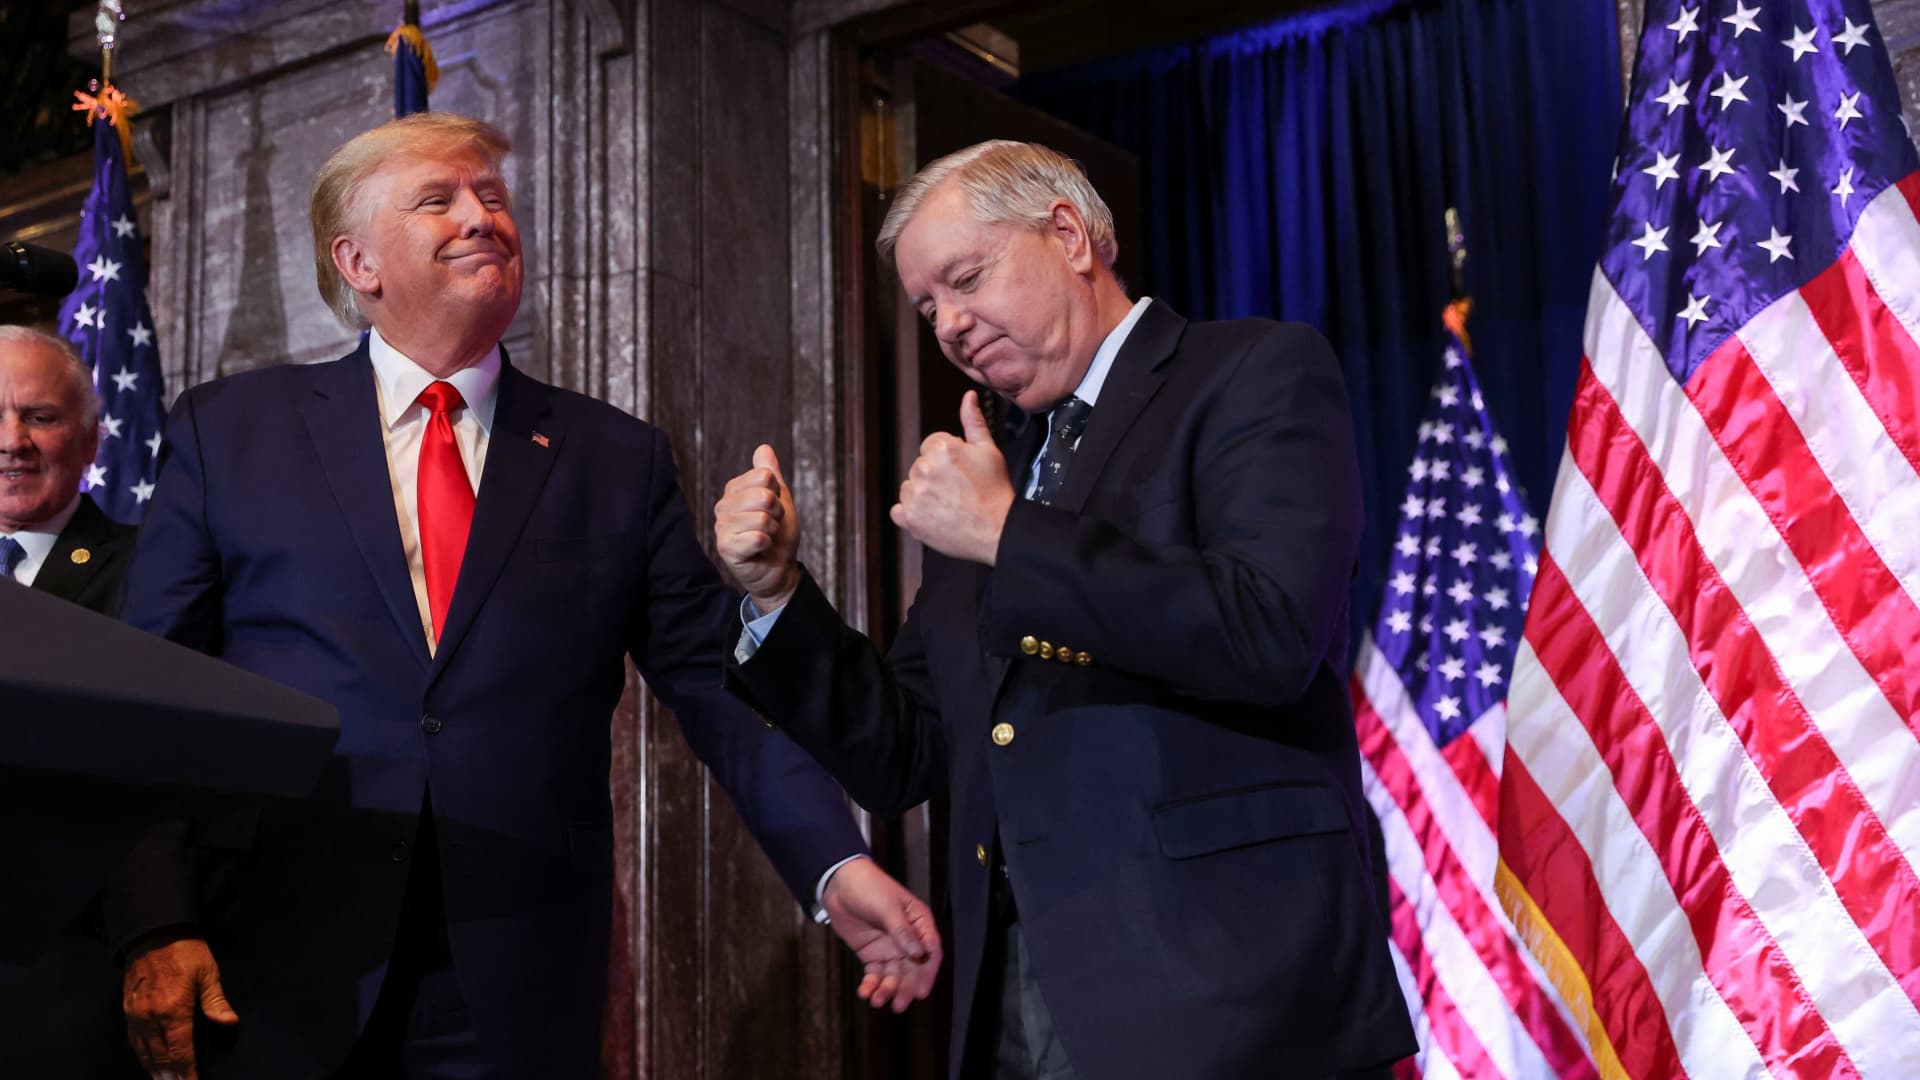 U.S. Senator Lindsey Graham (R-SC) gestures, while standing next to former U.S. President Donald Trump, during Donald Trump's campaign stop to unveil his leadership team, at the South Carolina State House in Columbia, South Carolina, U.S., January 28, 2023.